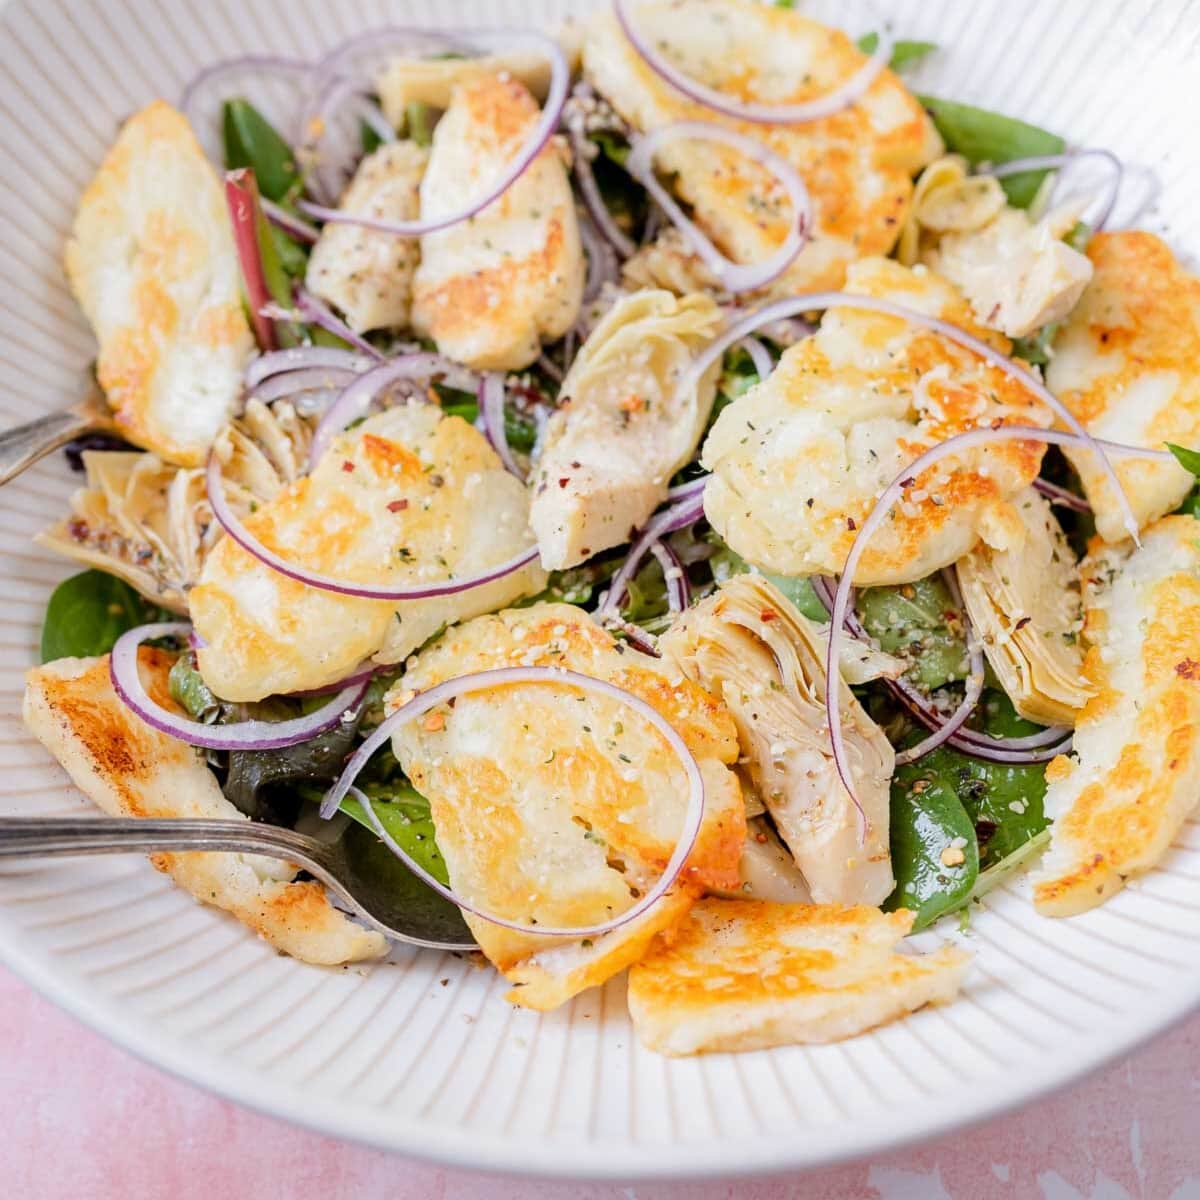 A large white bowl filled with salad greens and golden halloumi cheese slices.